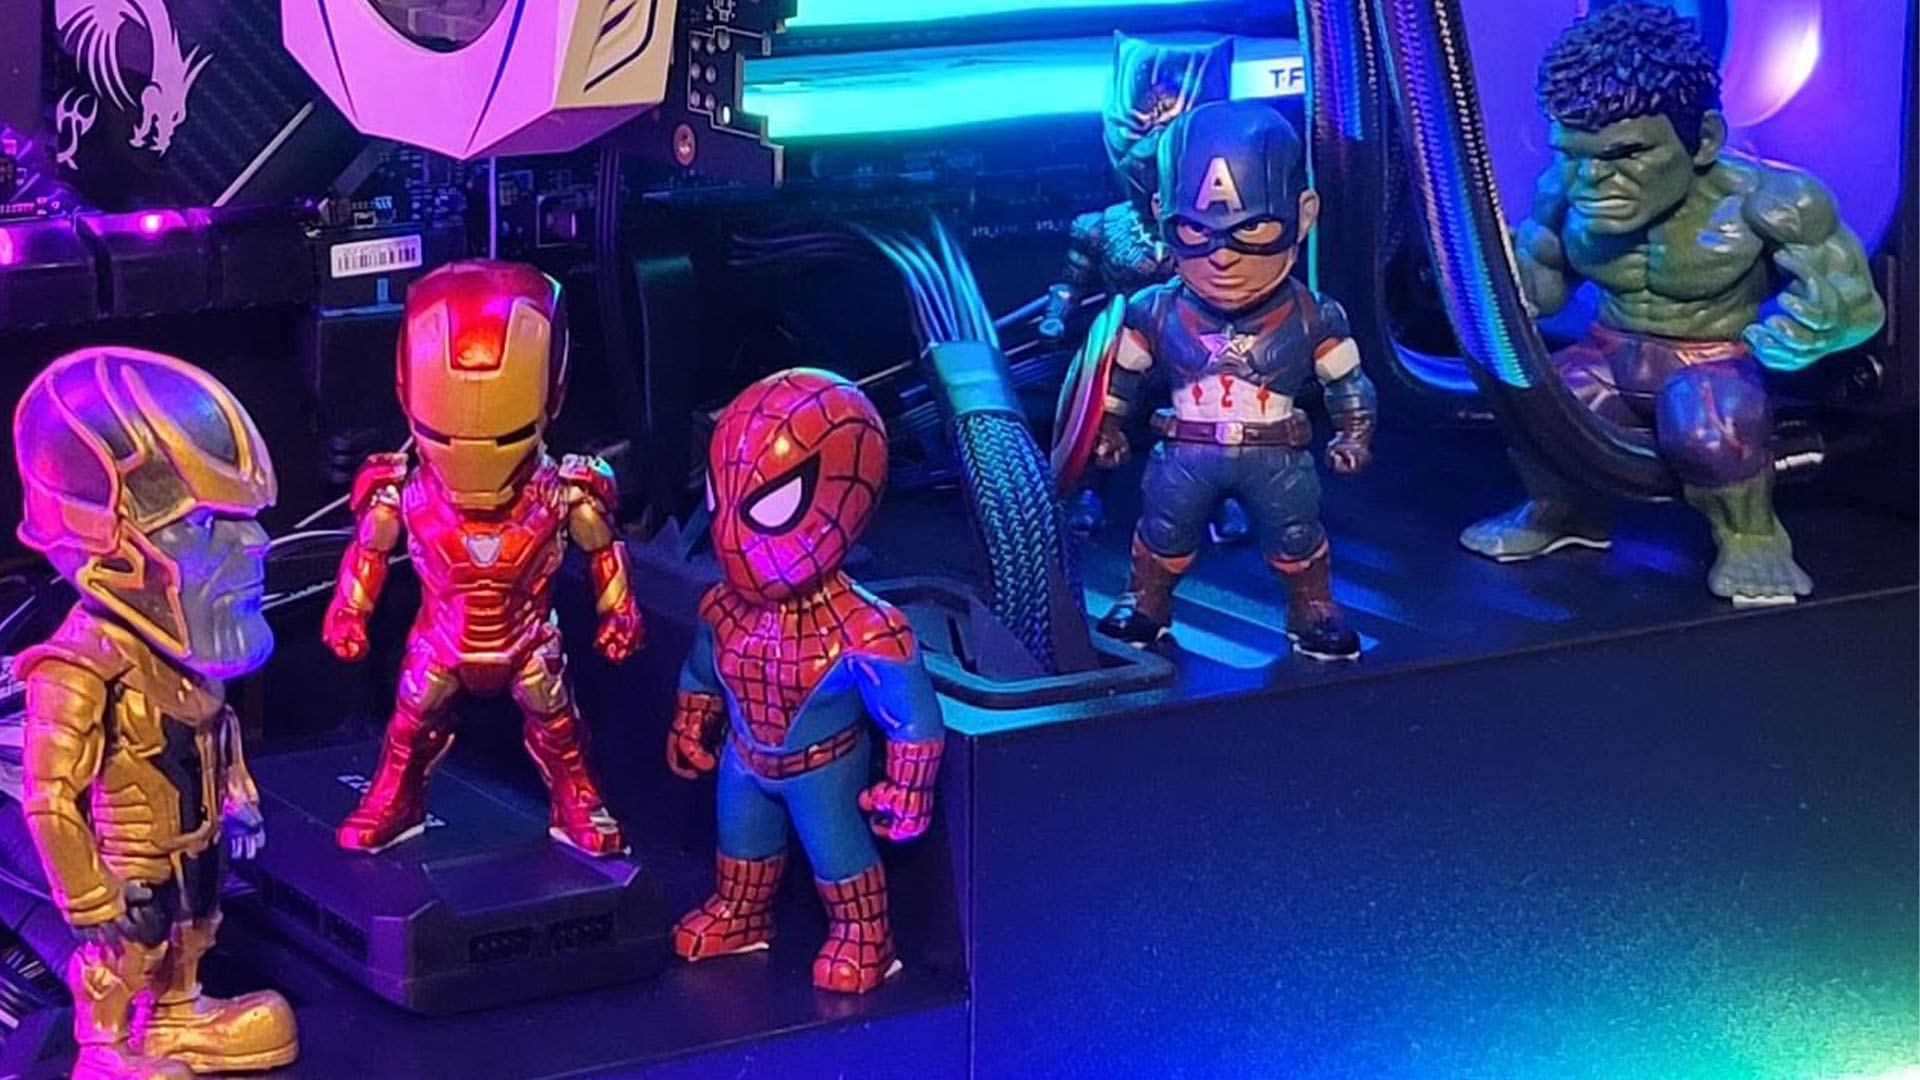 The Avengers figures inside the gaming PC